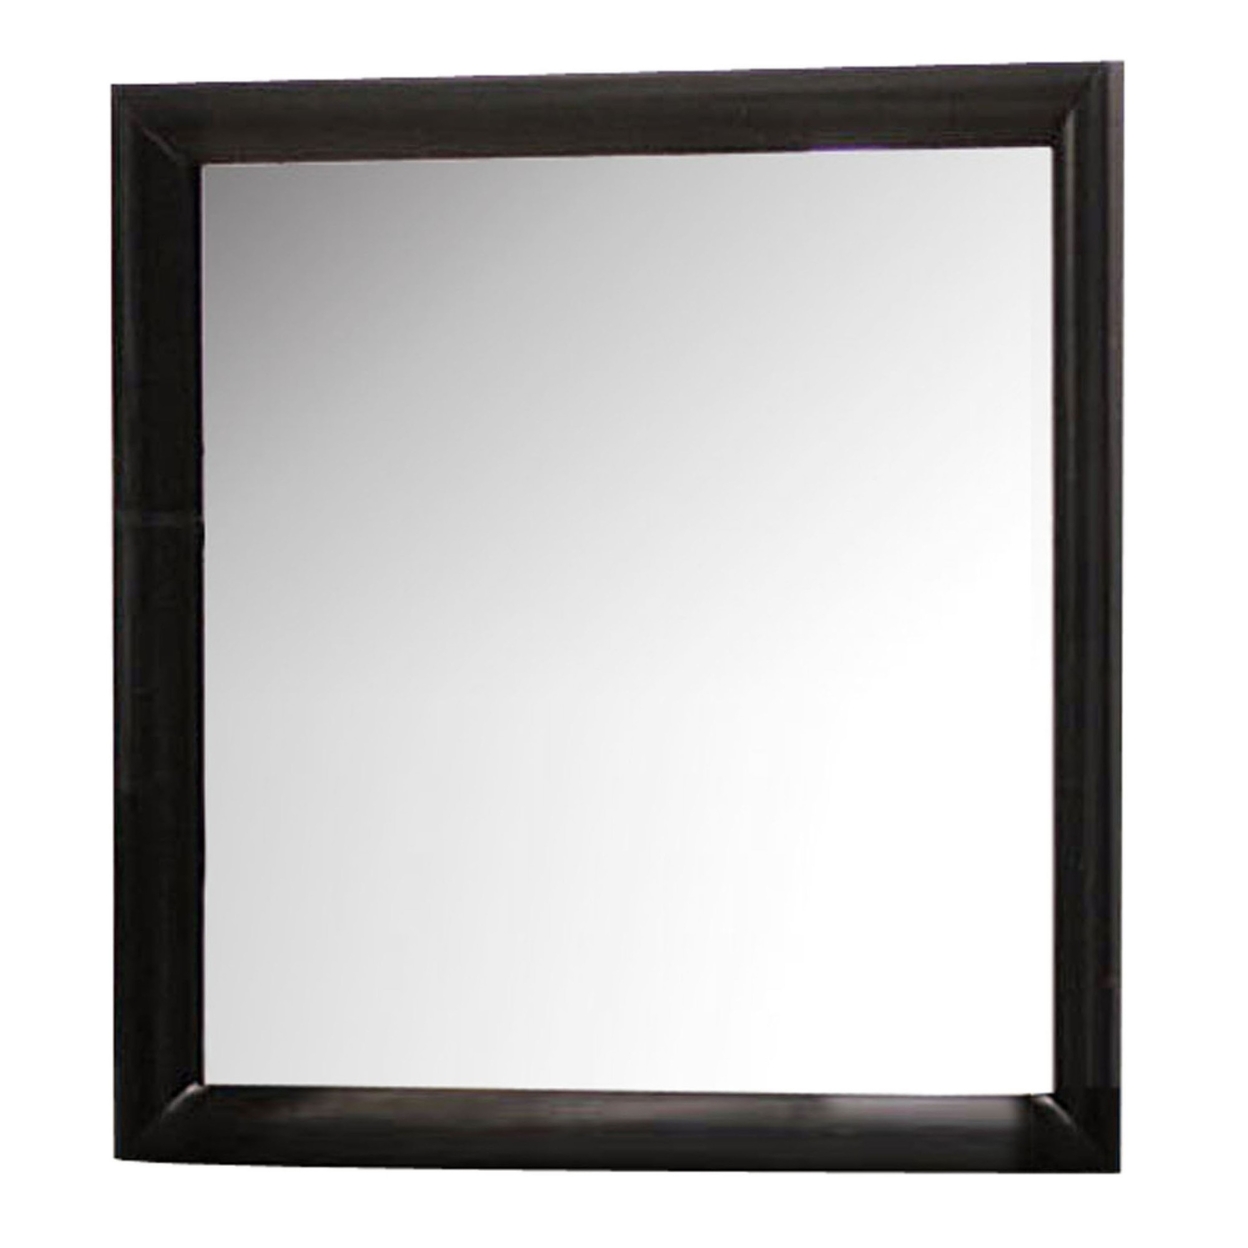 Contemporary Style Wooden Mirror With Beveled Edges, Silver And Black- Saltoro Sherpi